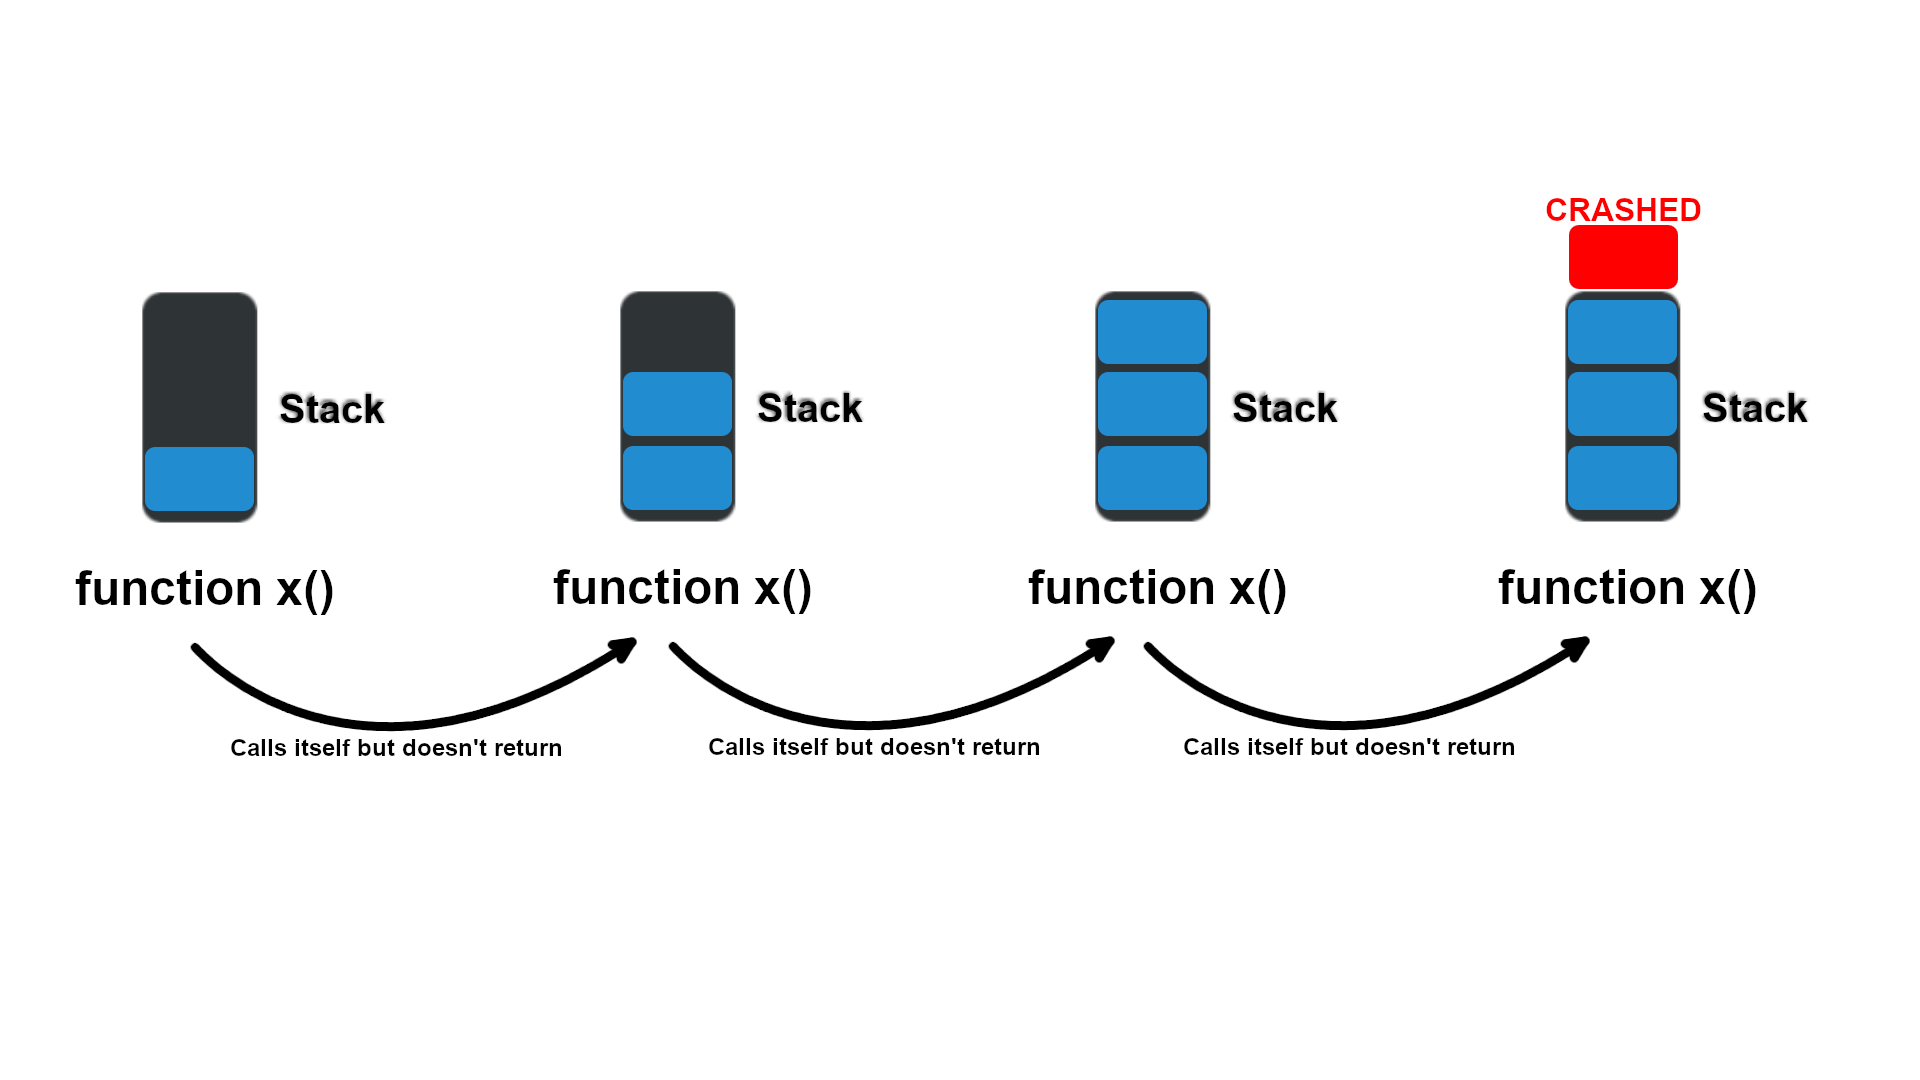 illustration representing a function that calls itself and fills up a stack memory indicator until it overflows